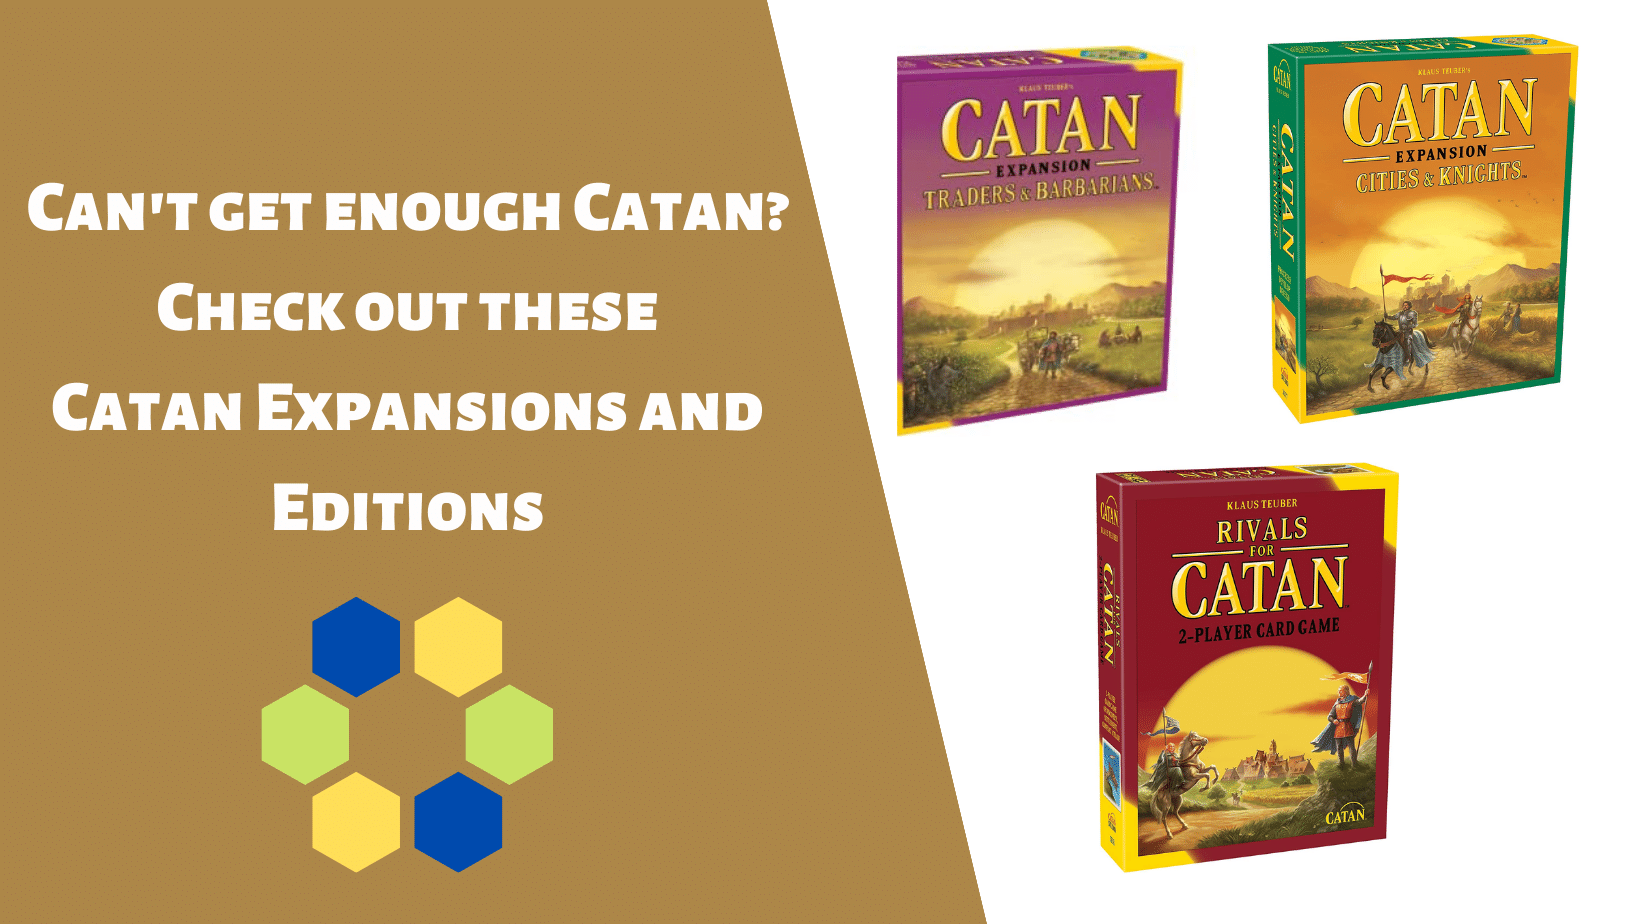 Catan Expansions to check out